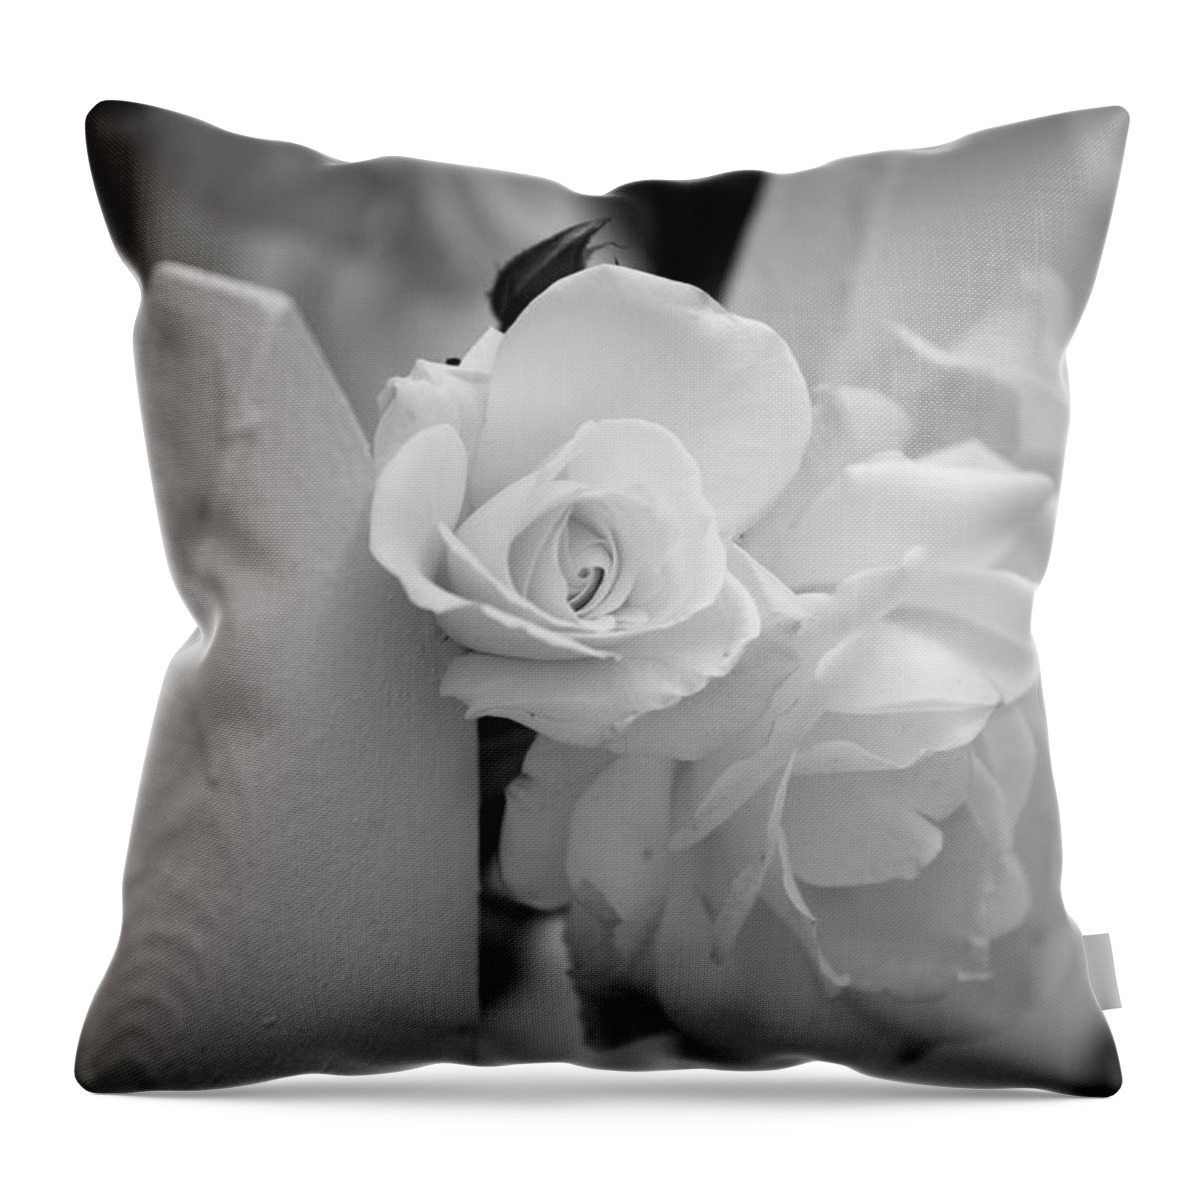 Black & White Throw Pillow featuring the photograph Picket Rose by Peter Tellone